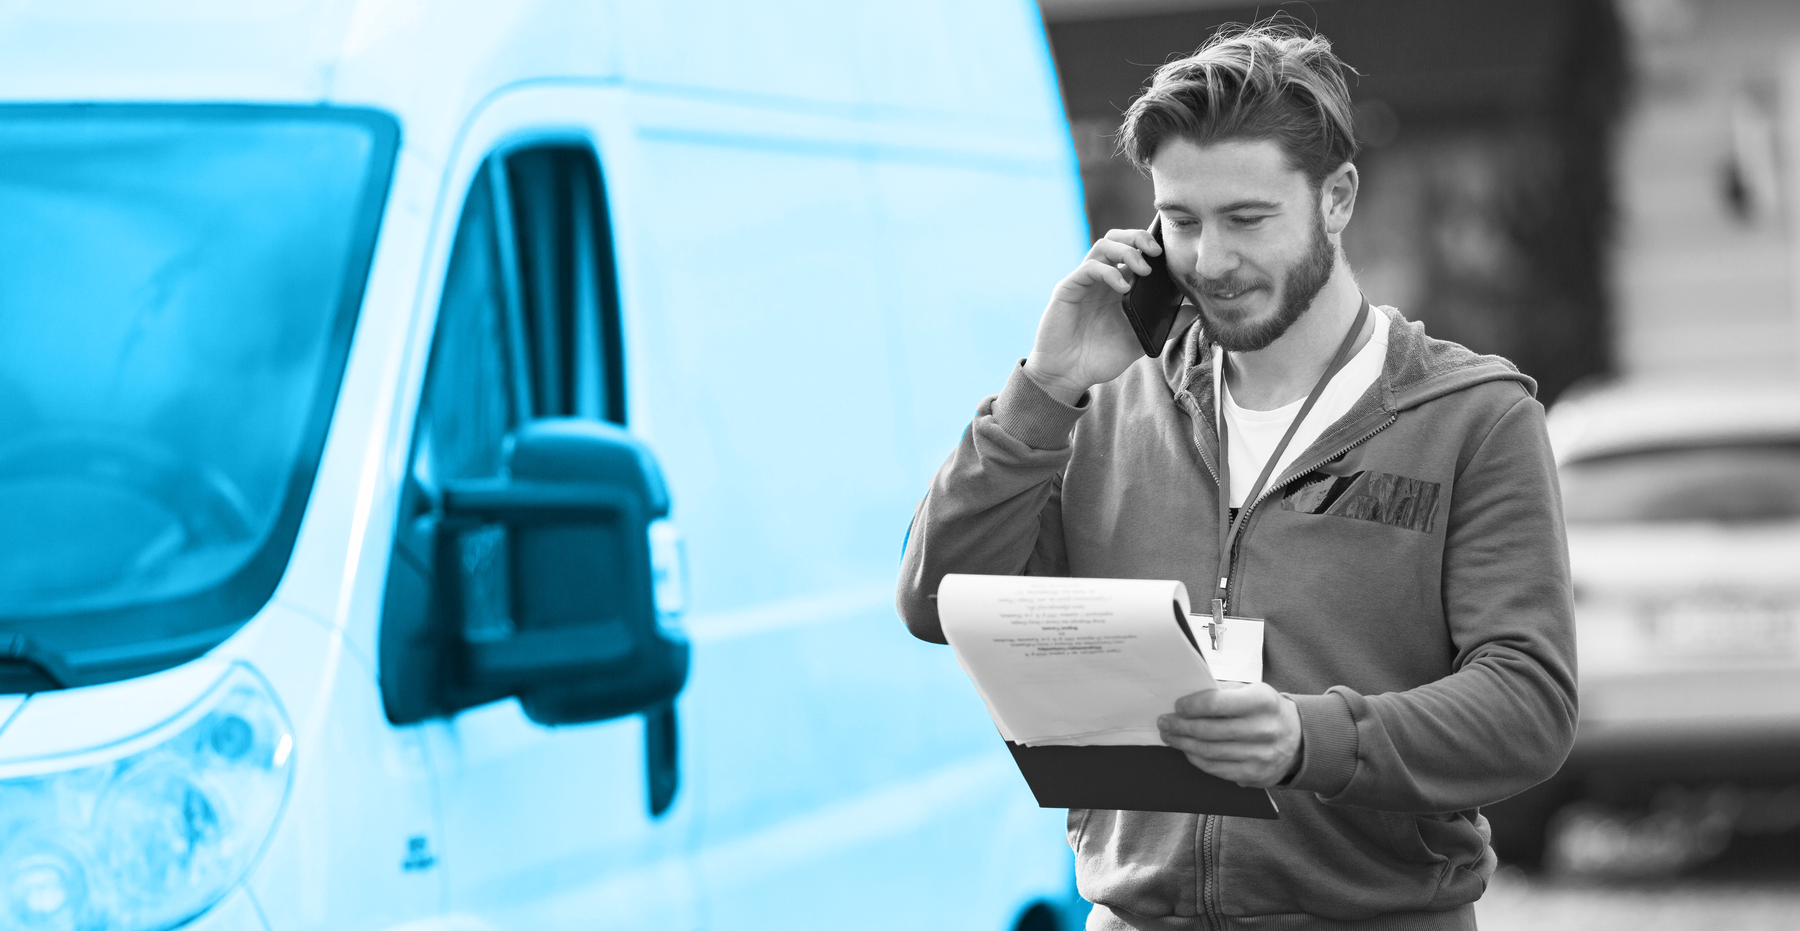 GPS fleet tracking greatly improves the management of your security fleet. Improve productivity through a fleet dash camera tracking solution perfect for security companies. 